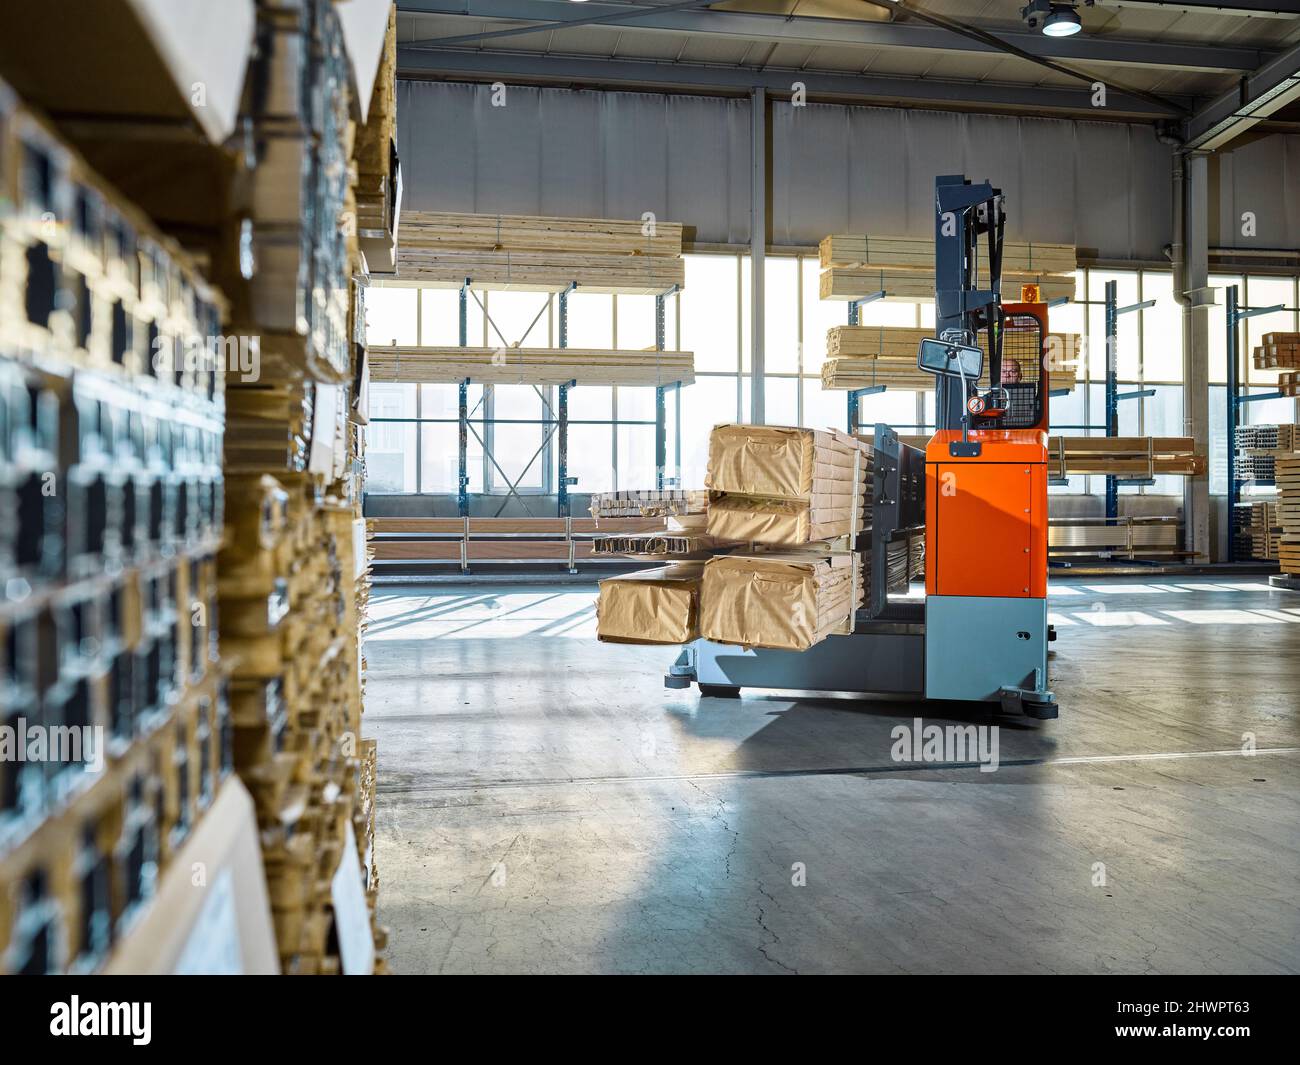 Warehouse worker operating forklift in industrial building Stock Photo